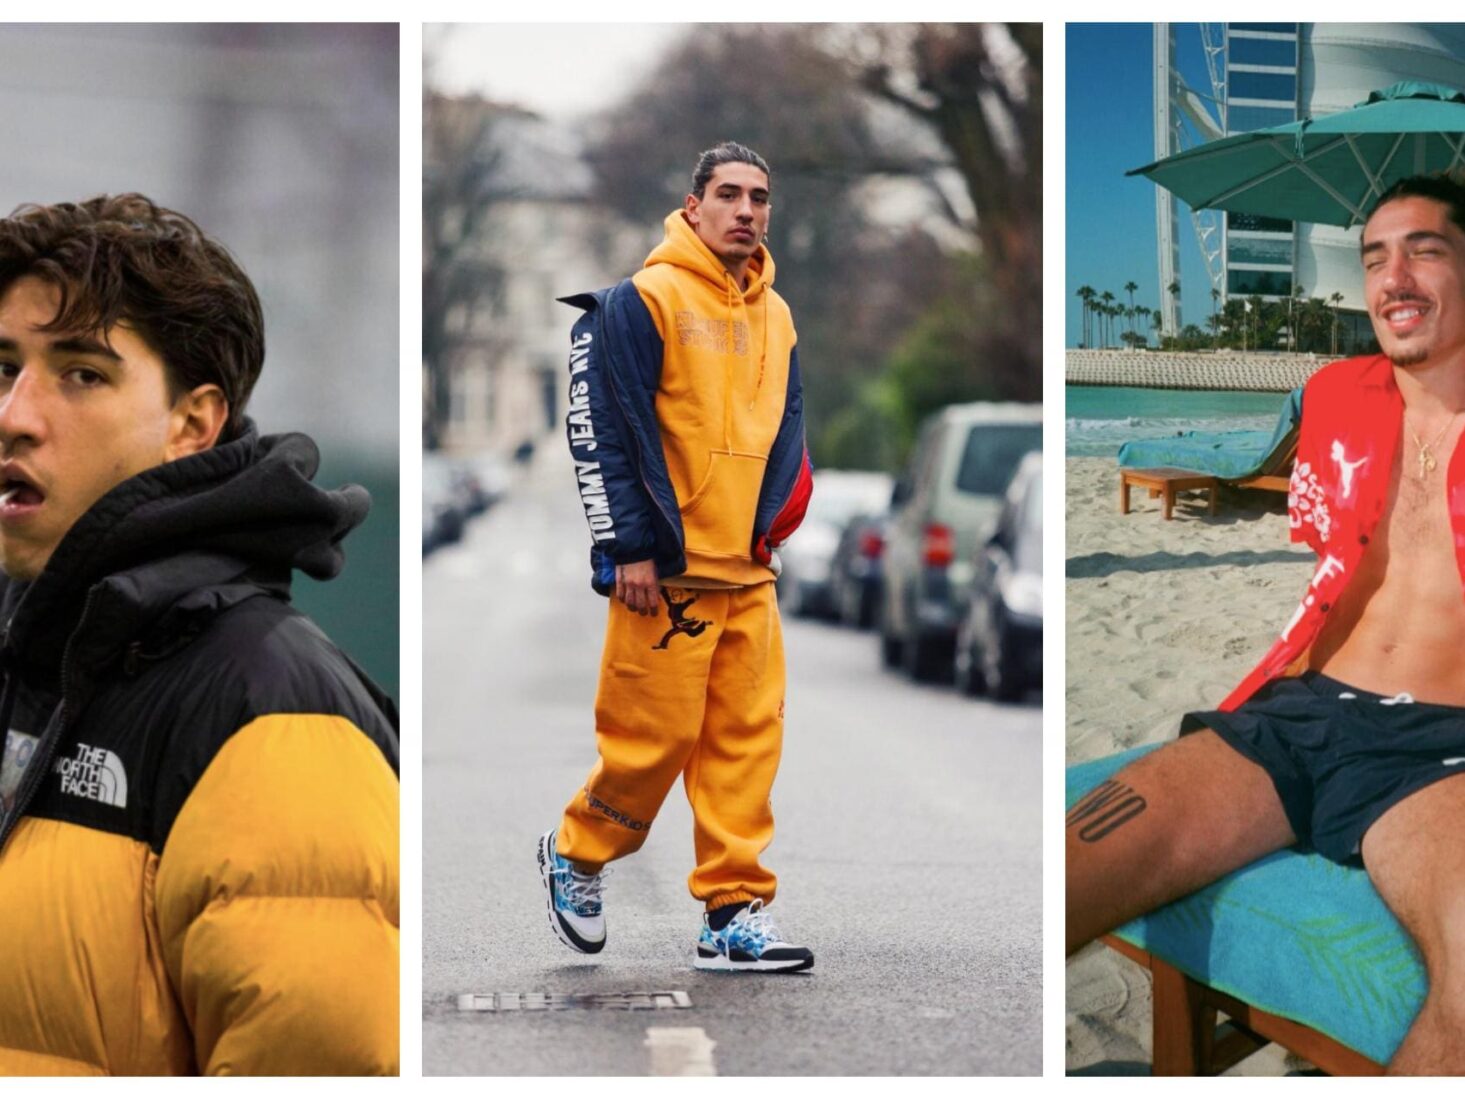 Hector Bellerin fashion: the Arsenal star is now a serious style